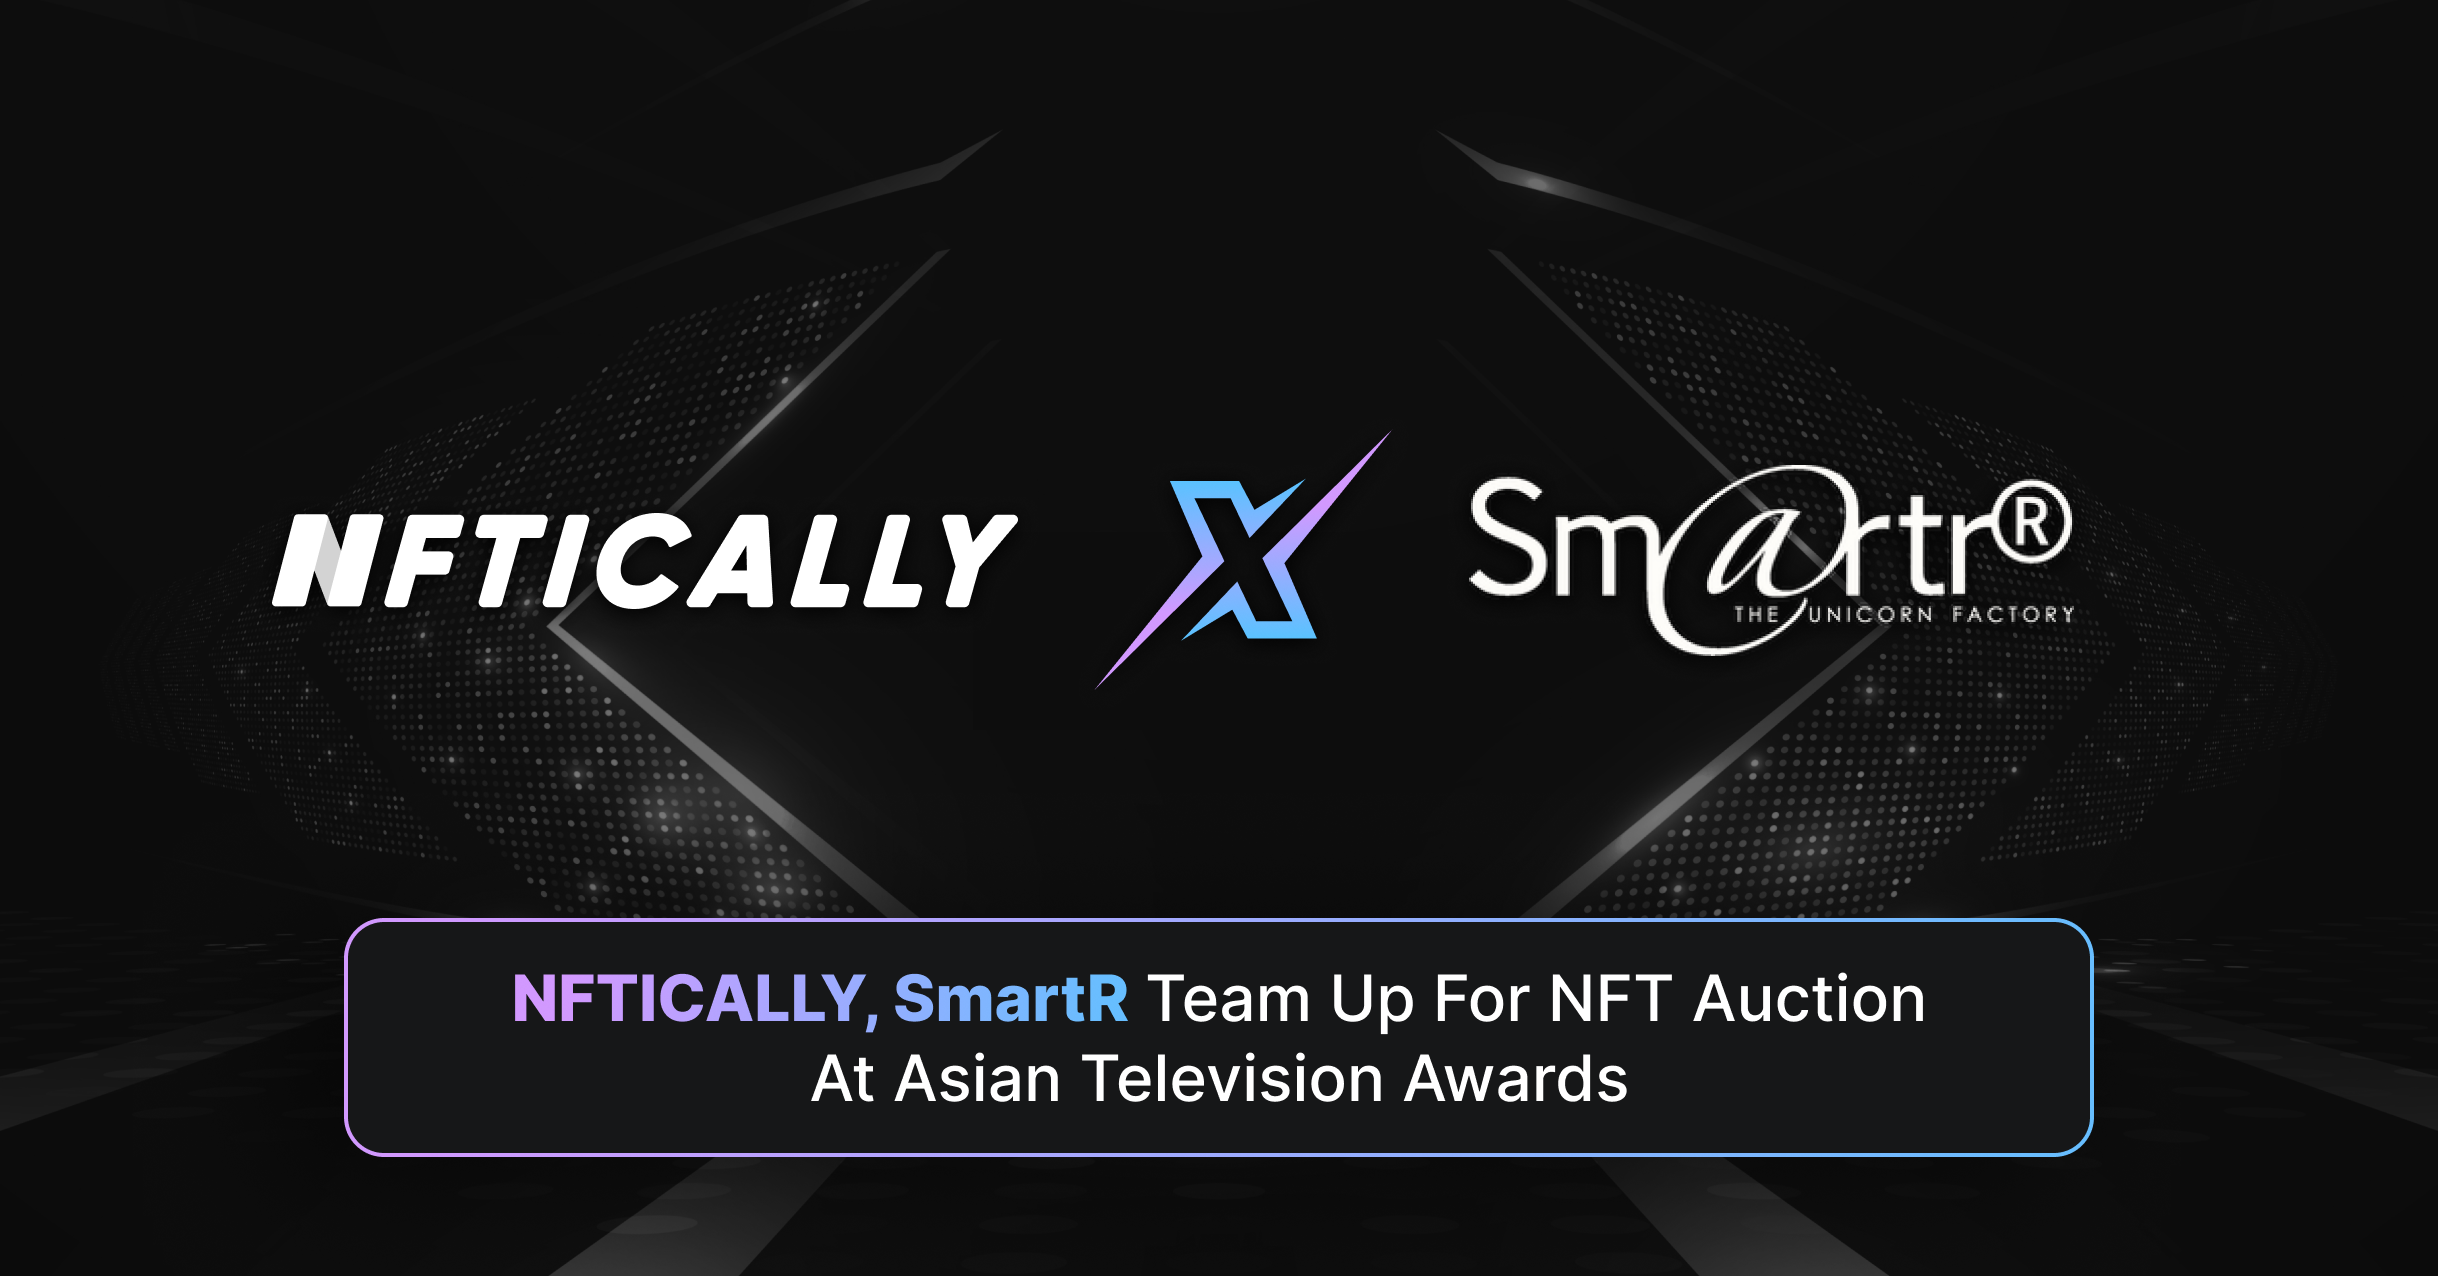 <strong>NFTICALLY, SmartR team up for NFT auction at Asian Television Awards</strong>